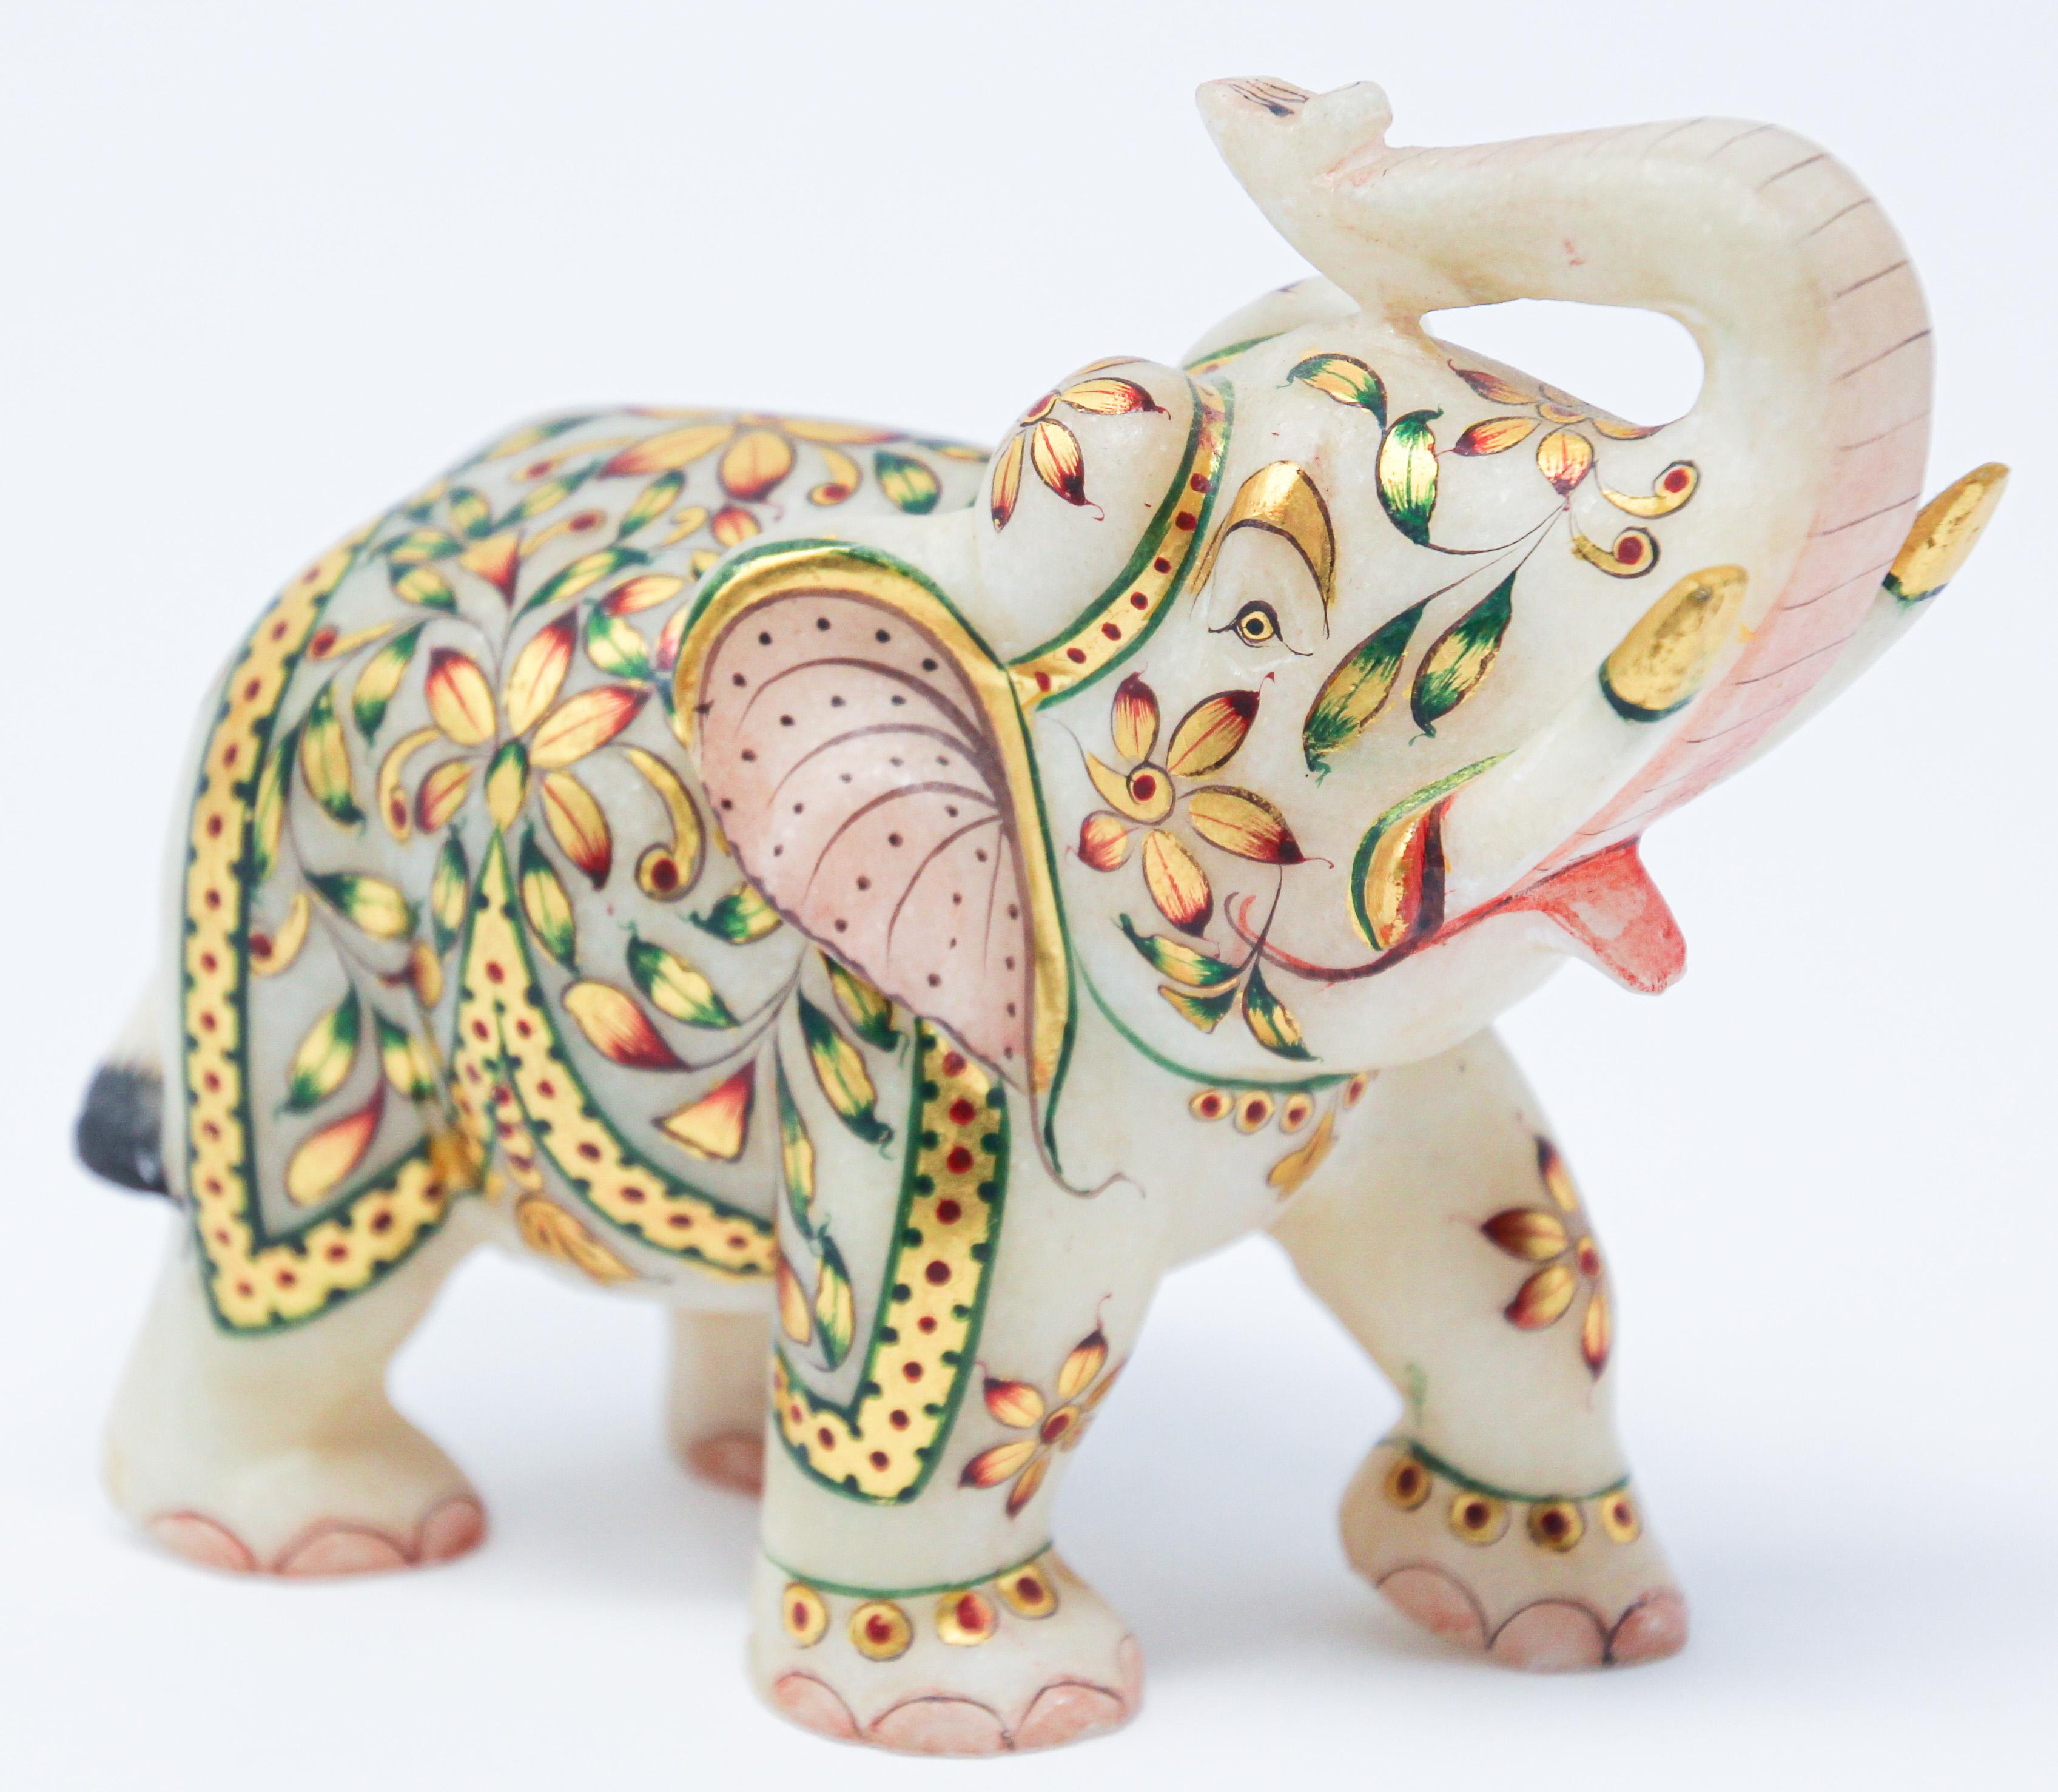 Vintage jeweled elephant sculpture paper weight wearing traditional ceremonial costume.
Finely hand painted with colorful gold, green and red color paint.
Collectible hand carved white marble stone sculpture figurine elephant with emboss painting